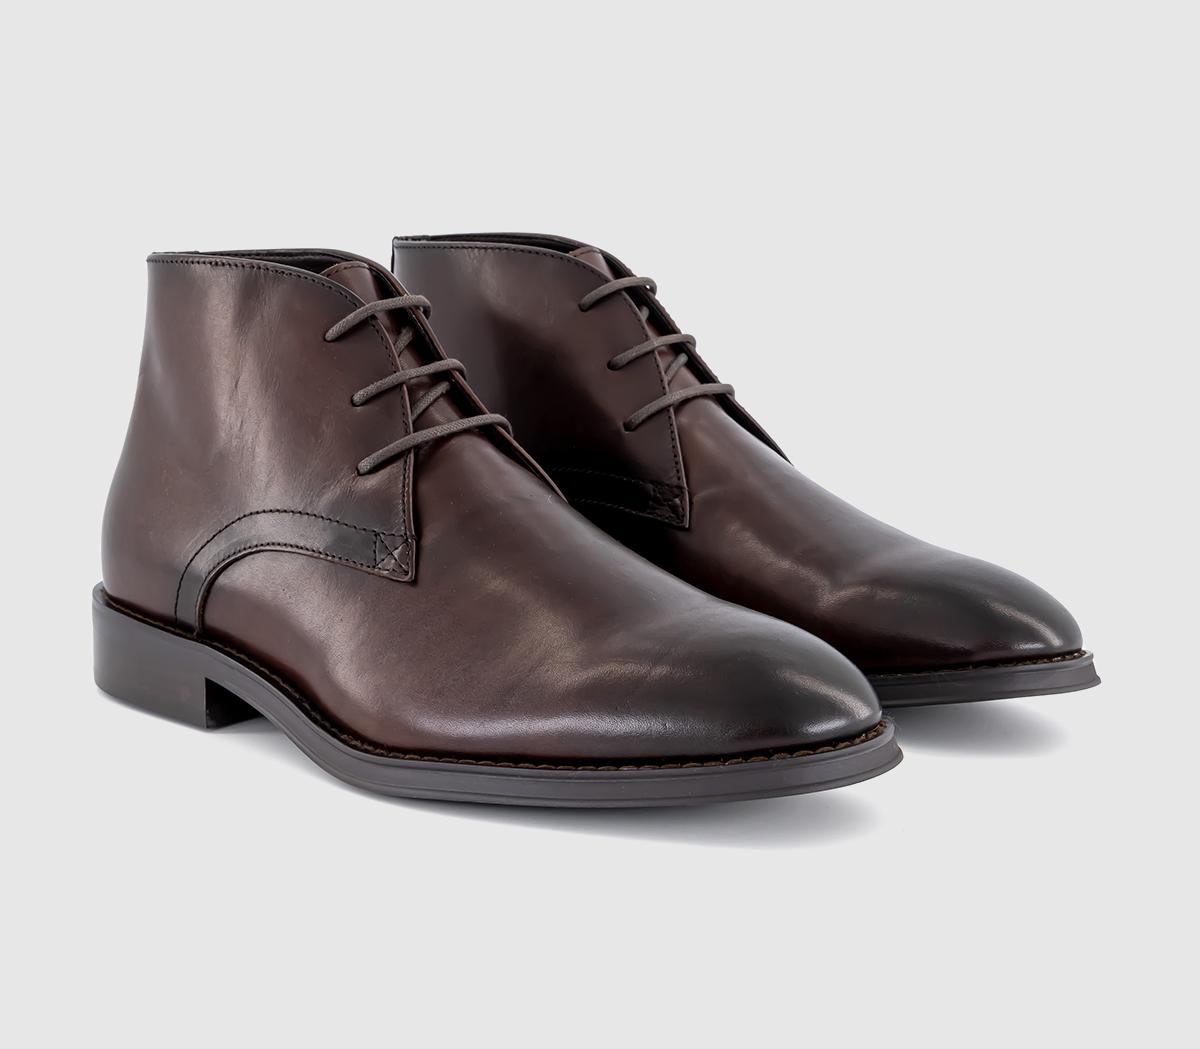 OFFICE Banbury Chukka Boots Brown Leather - Men’s Boots